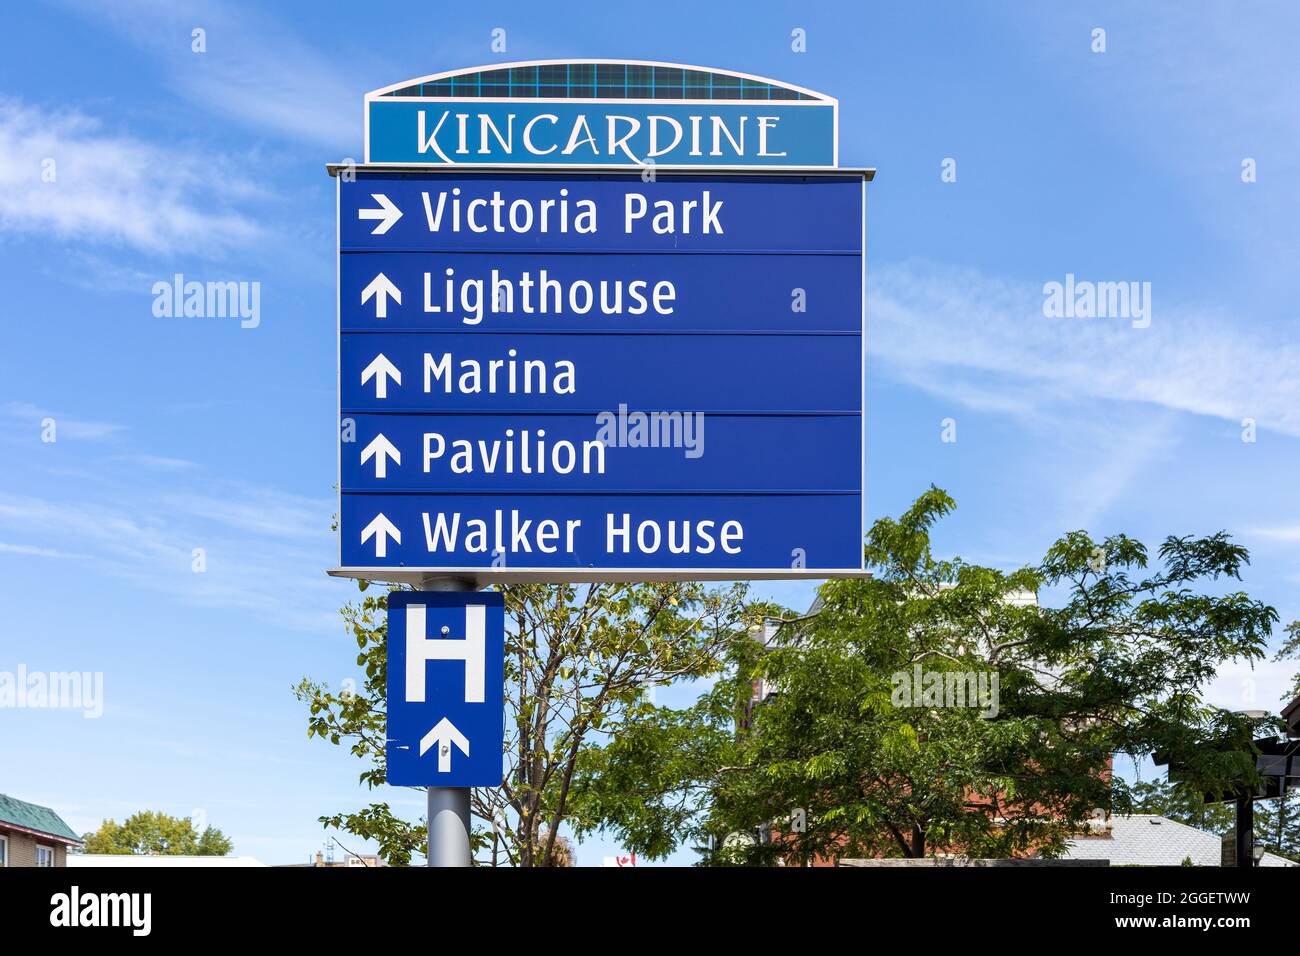 Street Sign Places Of Interest Direction In Kincardine Ontario Canada Stock Photo